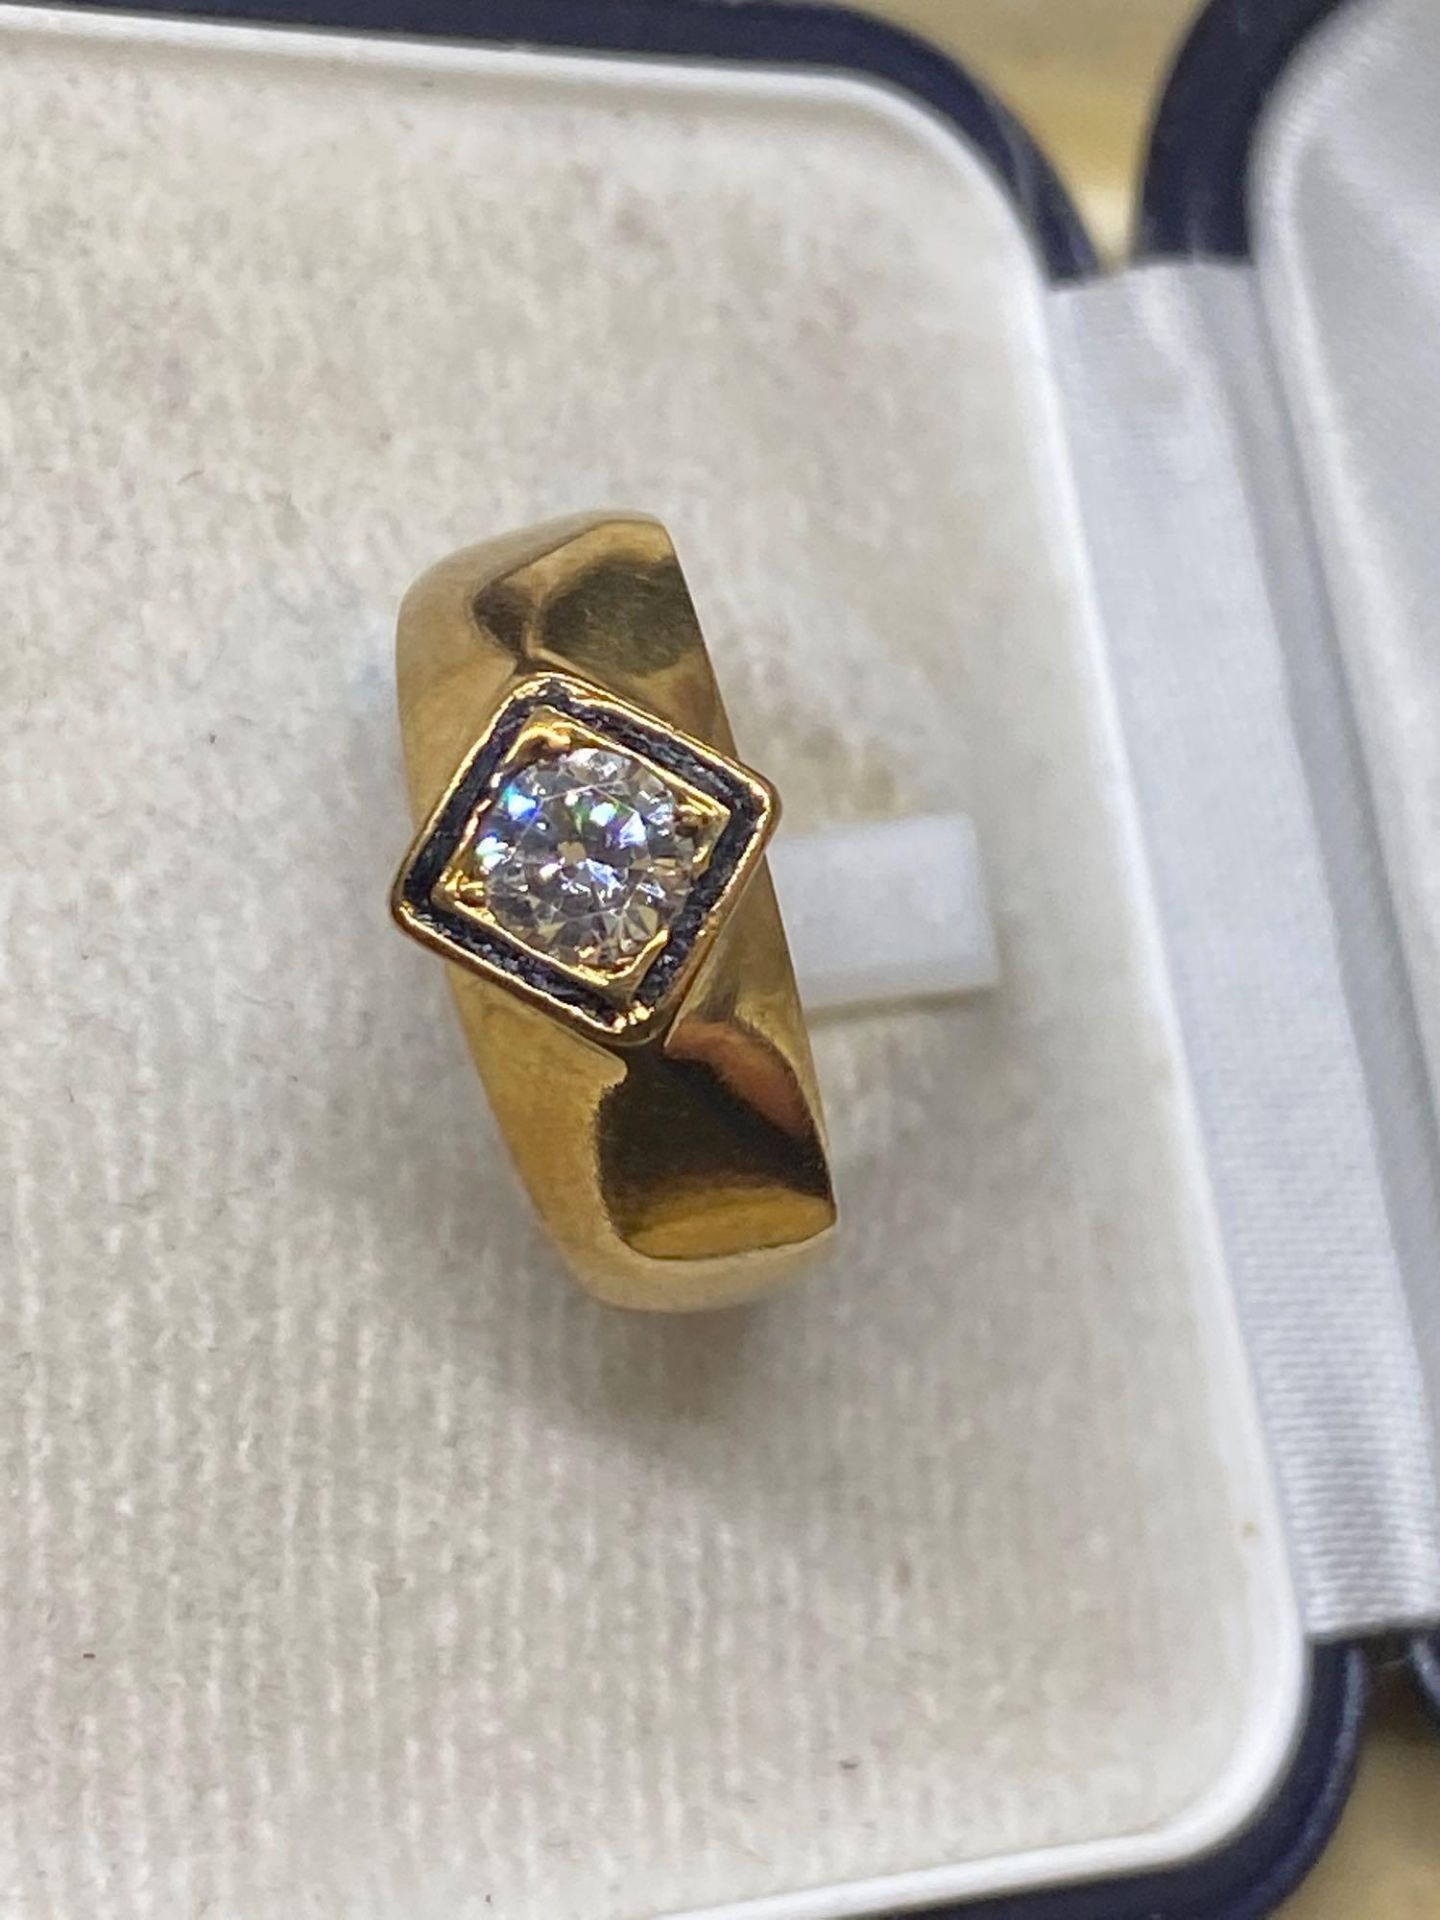 Vintage Gold Coloured Ring 0.50ct H-G/SI2-I2 Diamond Ring - Tested as 14ct Gold - Image 3 of 3